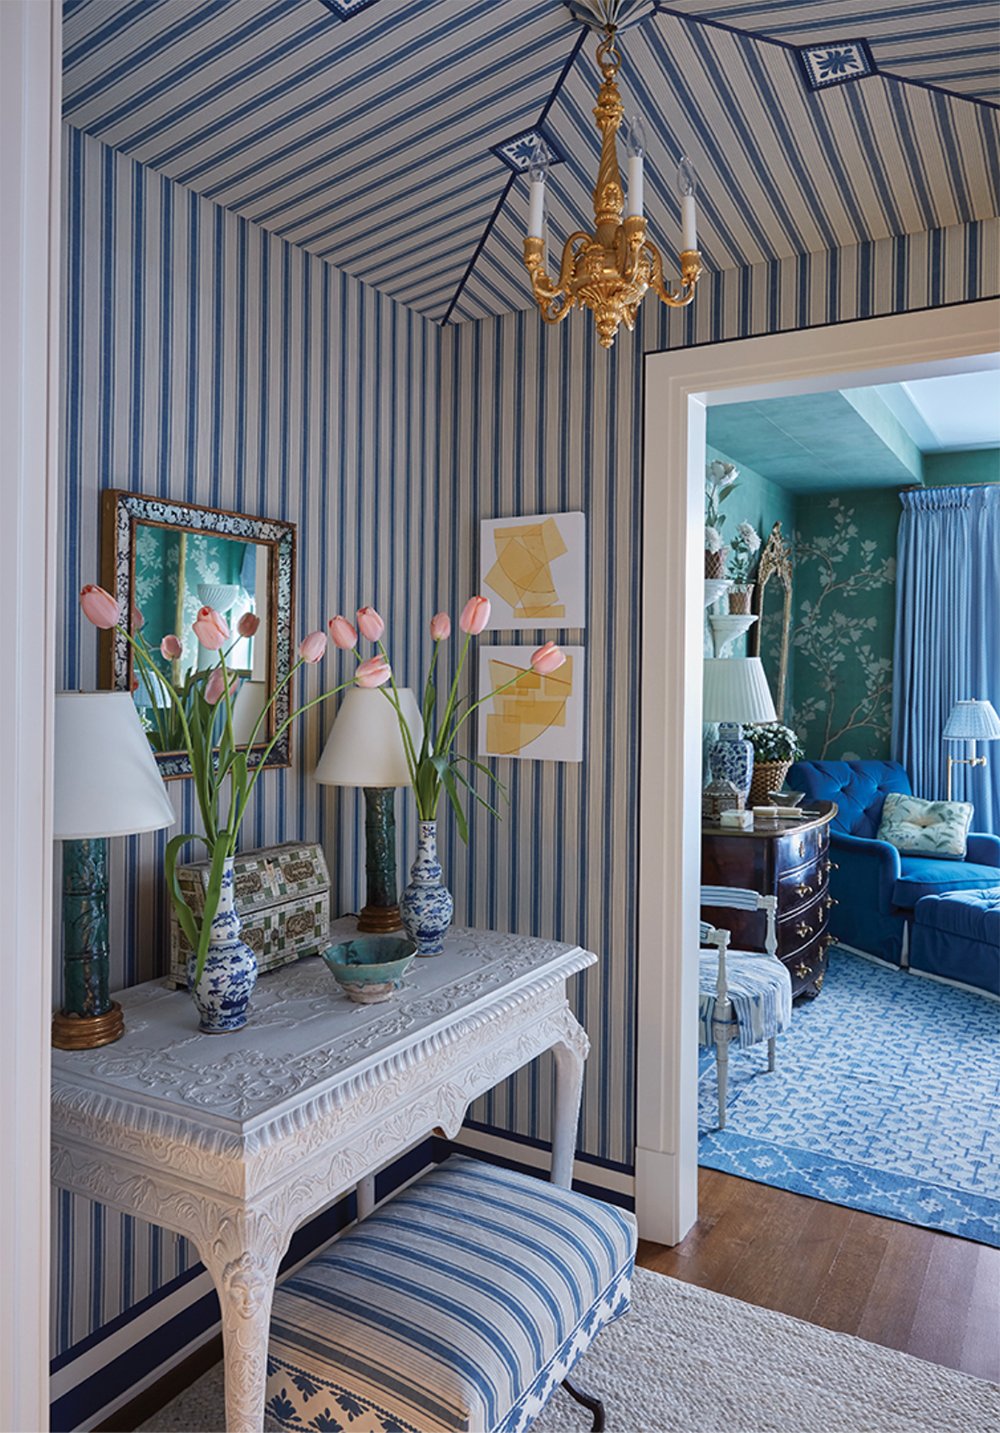 Roundup : Floral, Striped, & Toile Wallpaper